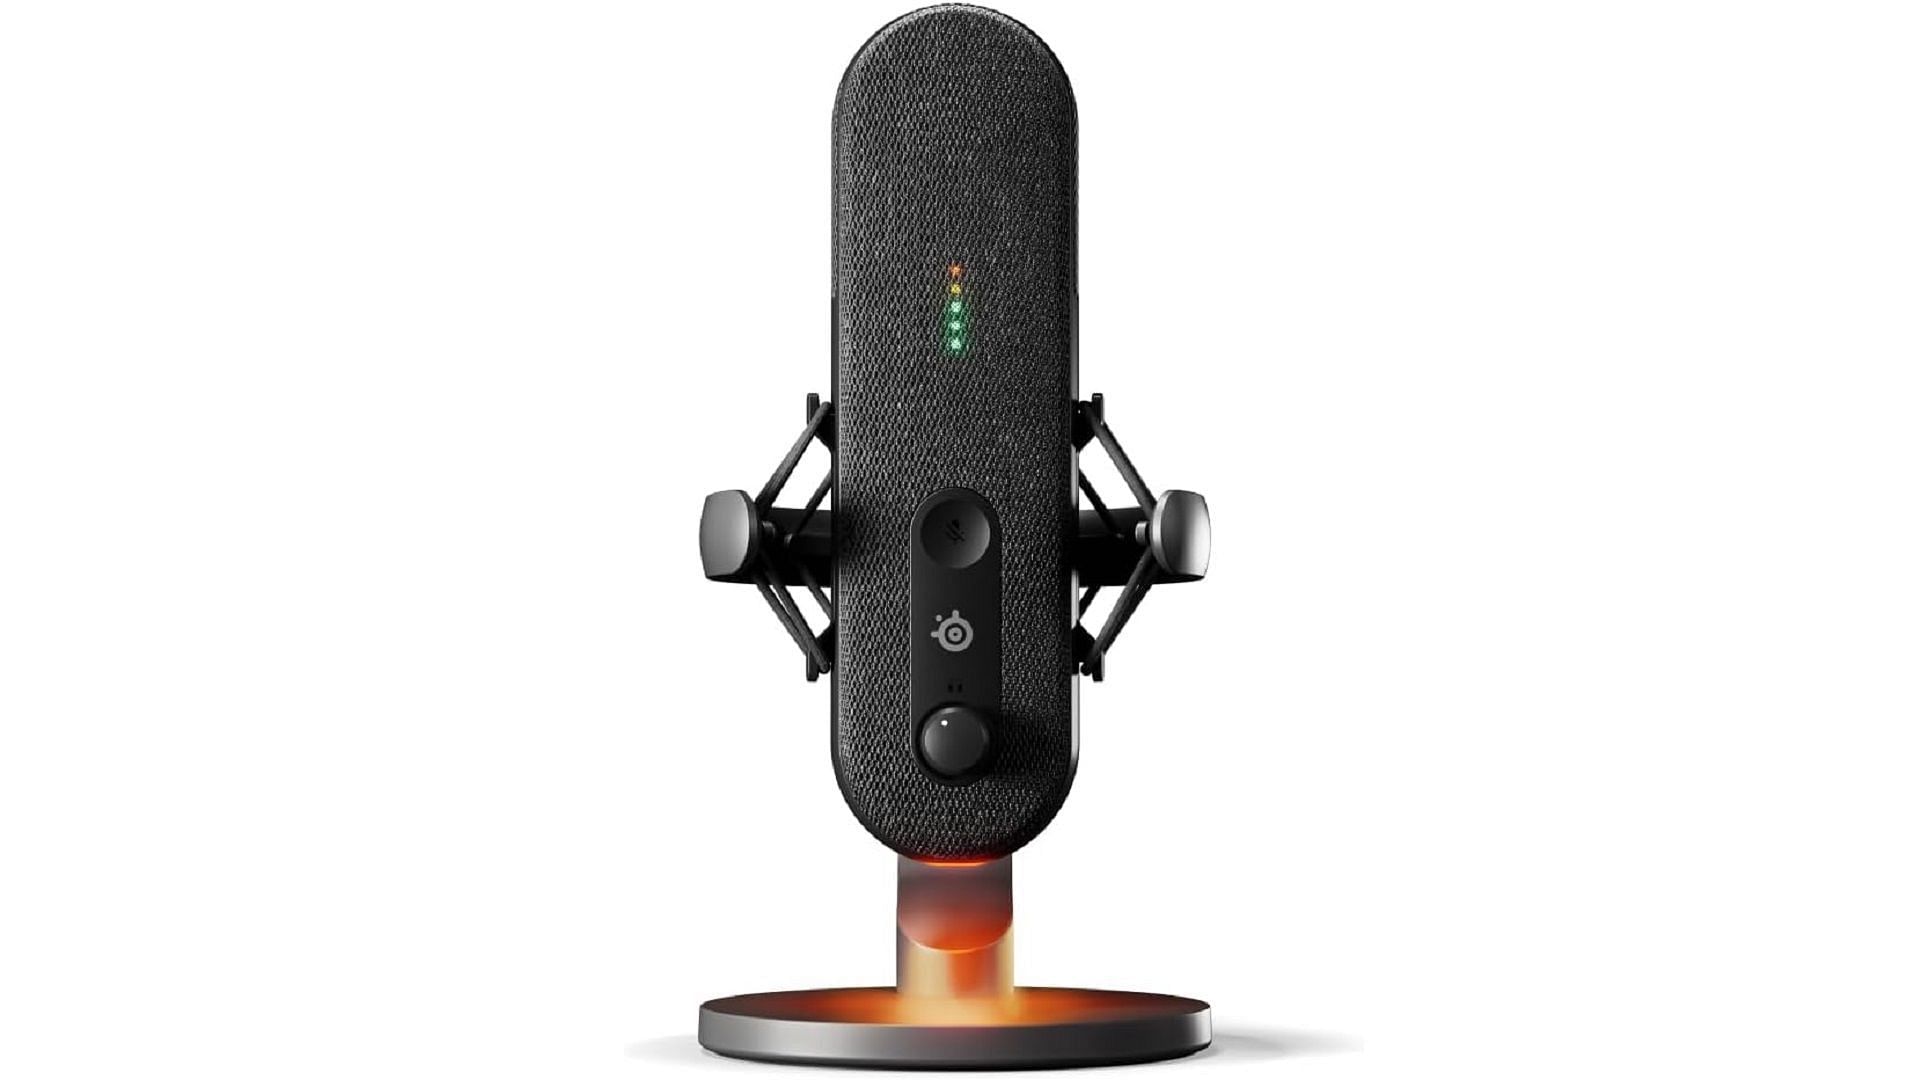 SteelSeries Alias microphone with RGB effects on (Image via Amazon)